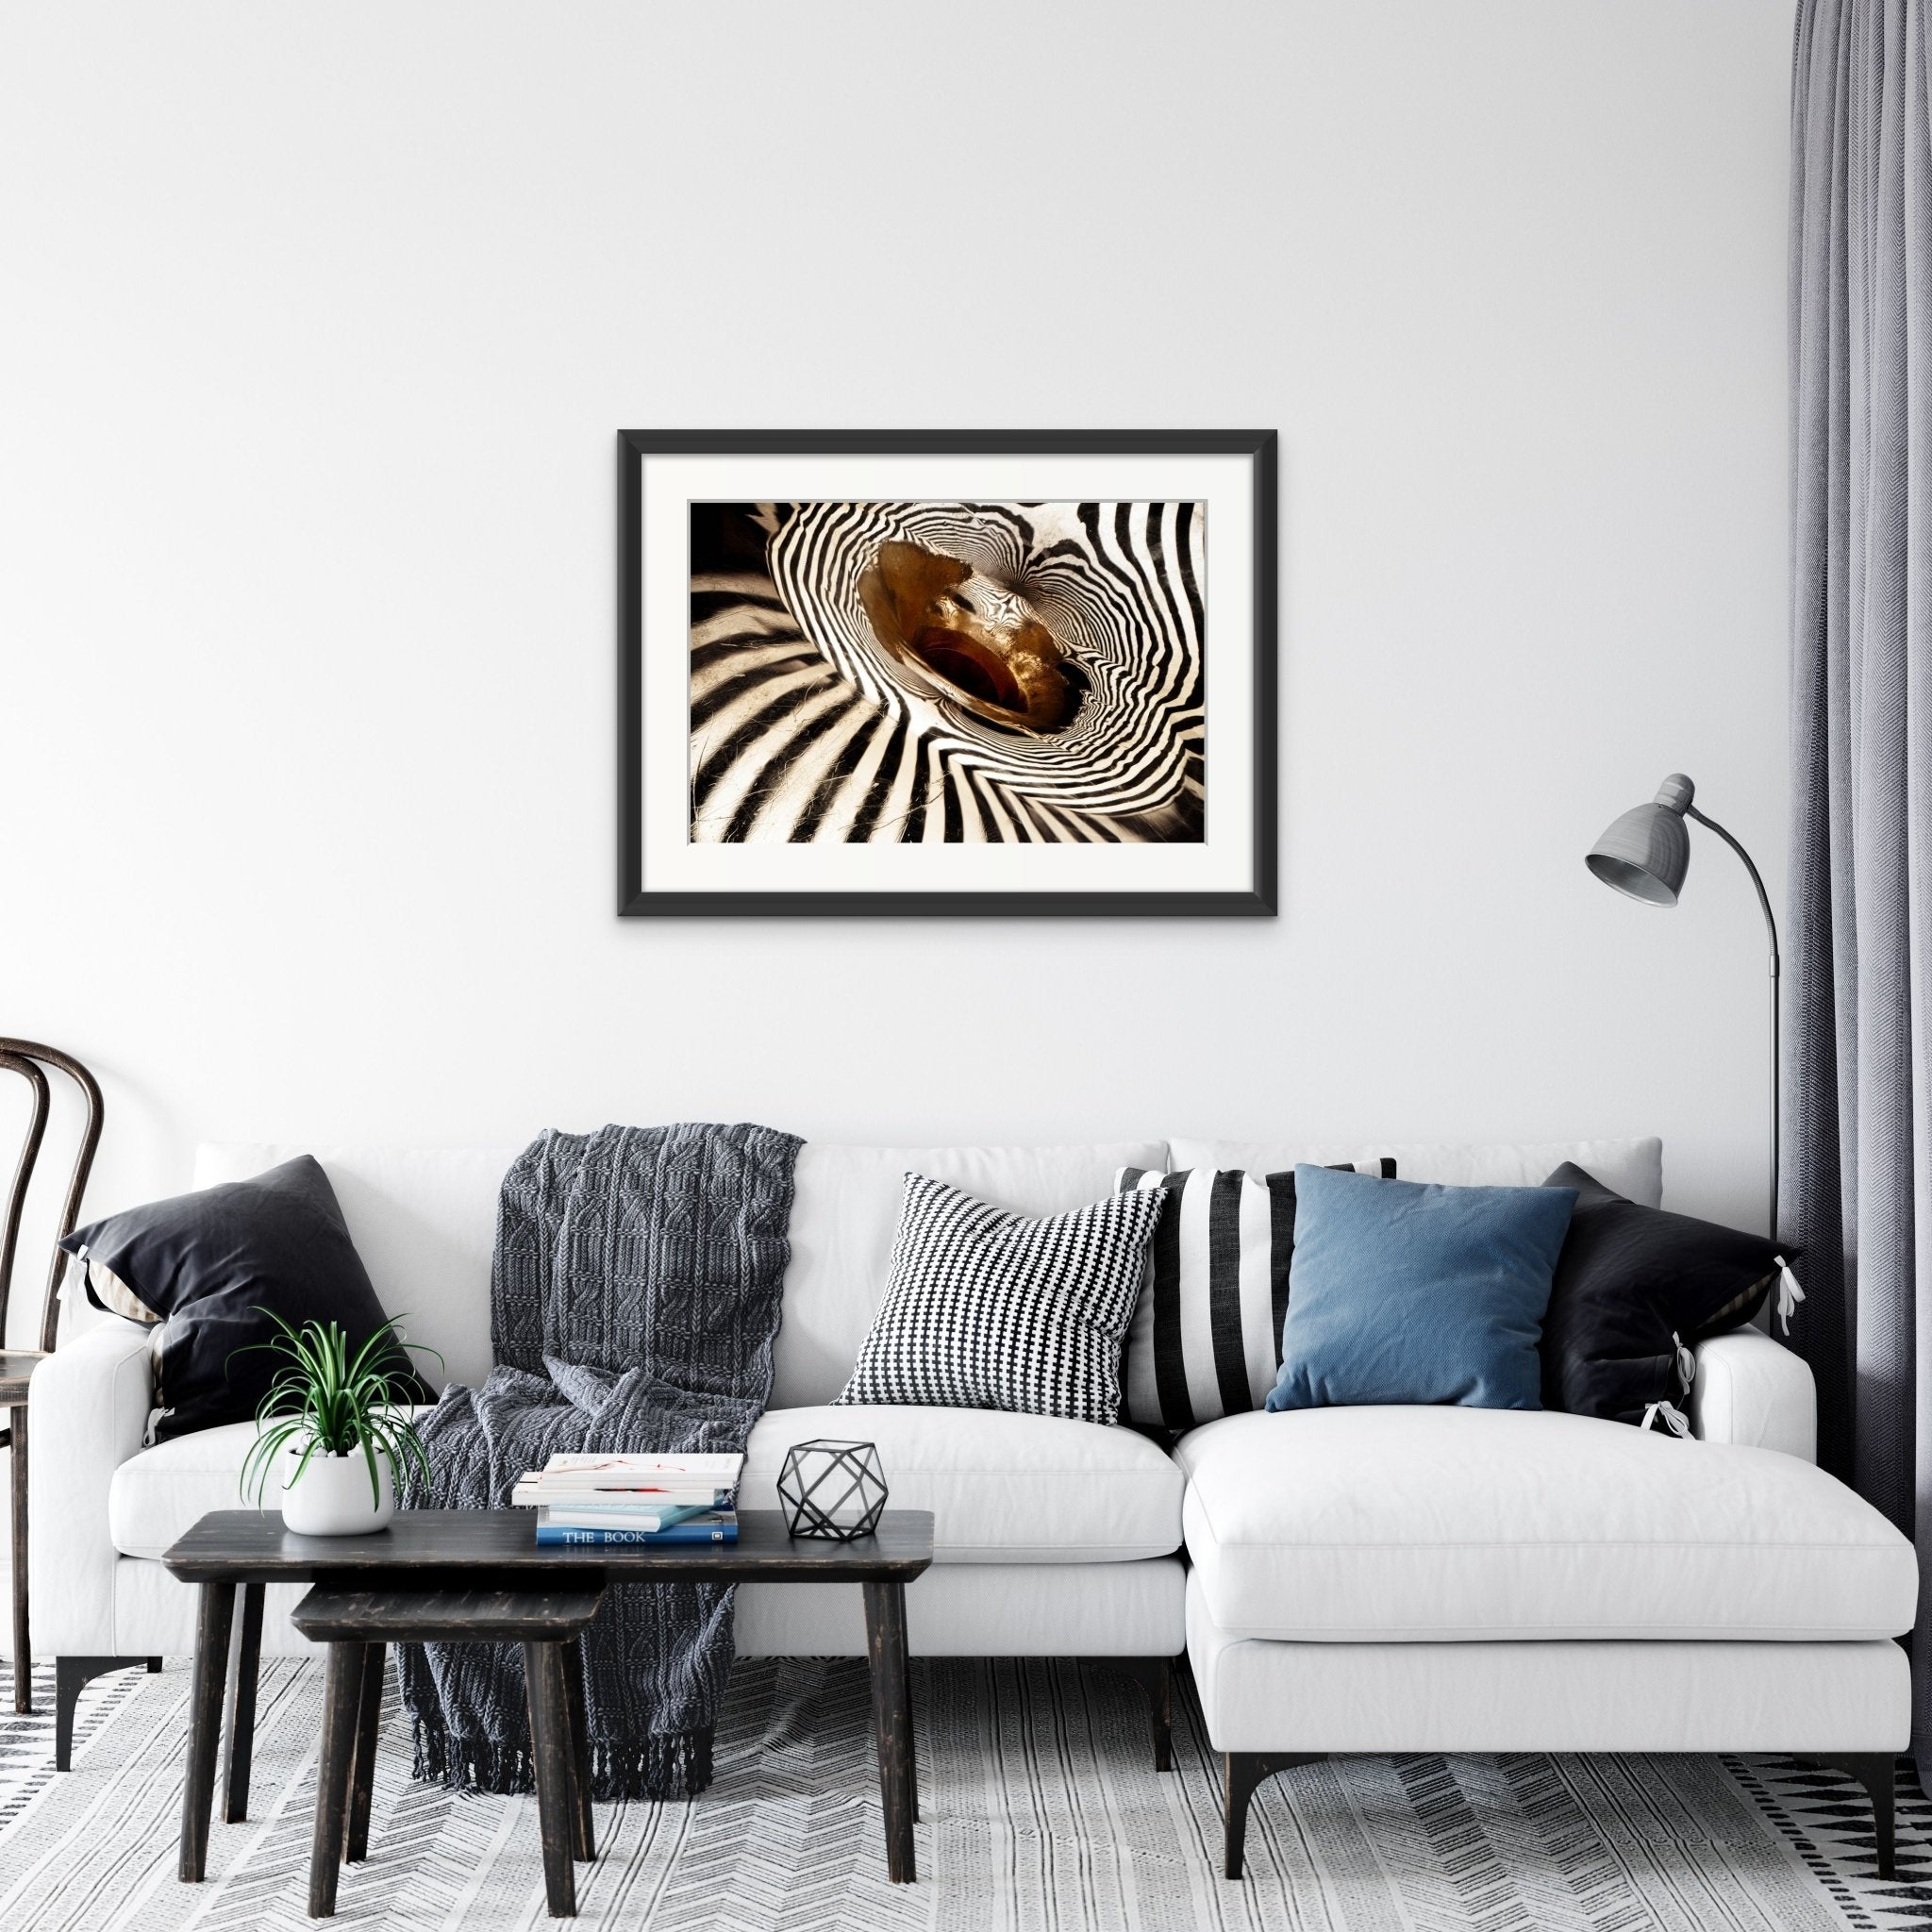 Photo of Yamaha 867d French Horn, part 2. Signed Limited Edition Museum Quality Print. - Giclée Museum Quality Print - Architecture In Music